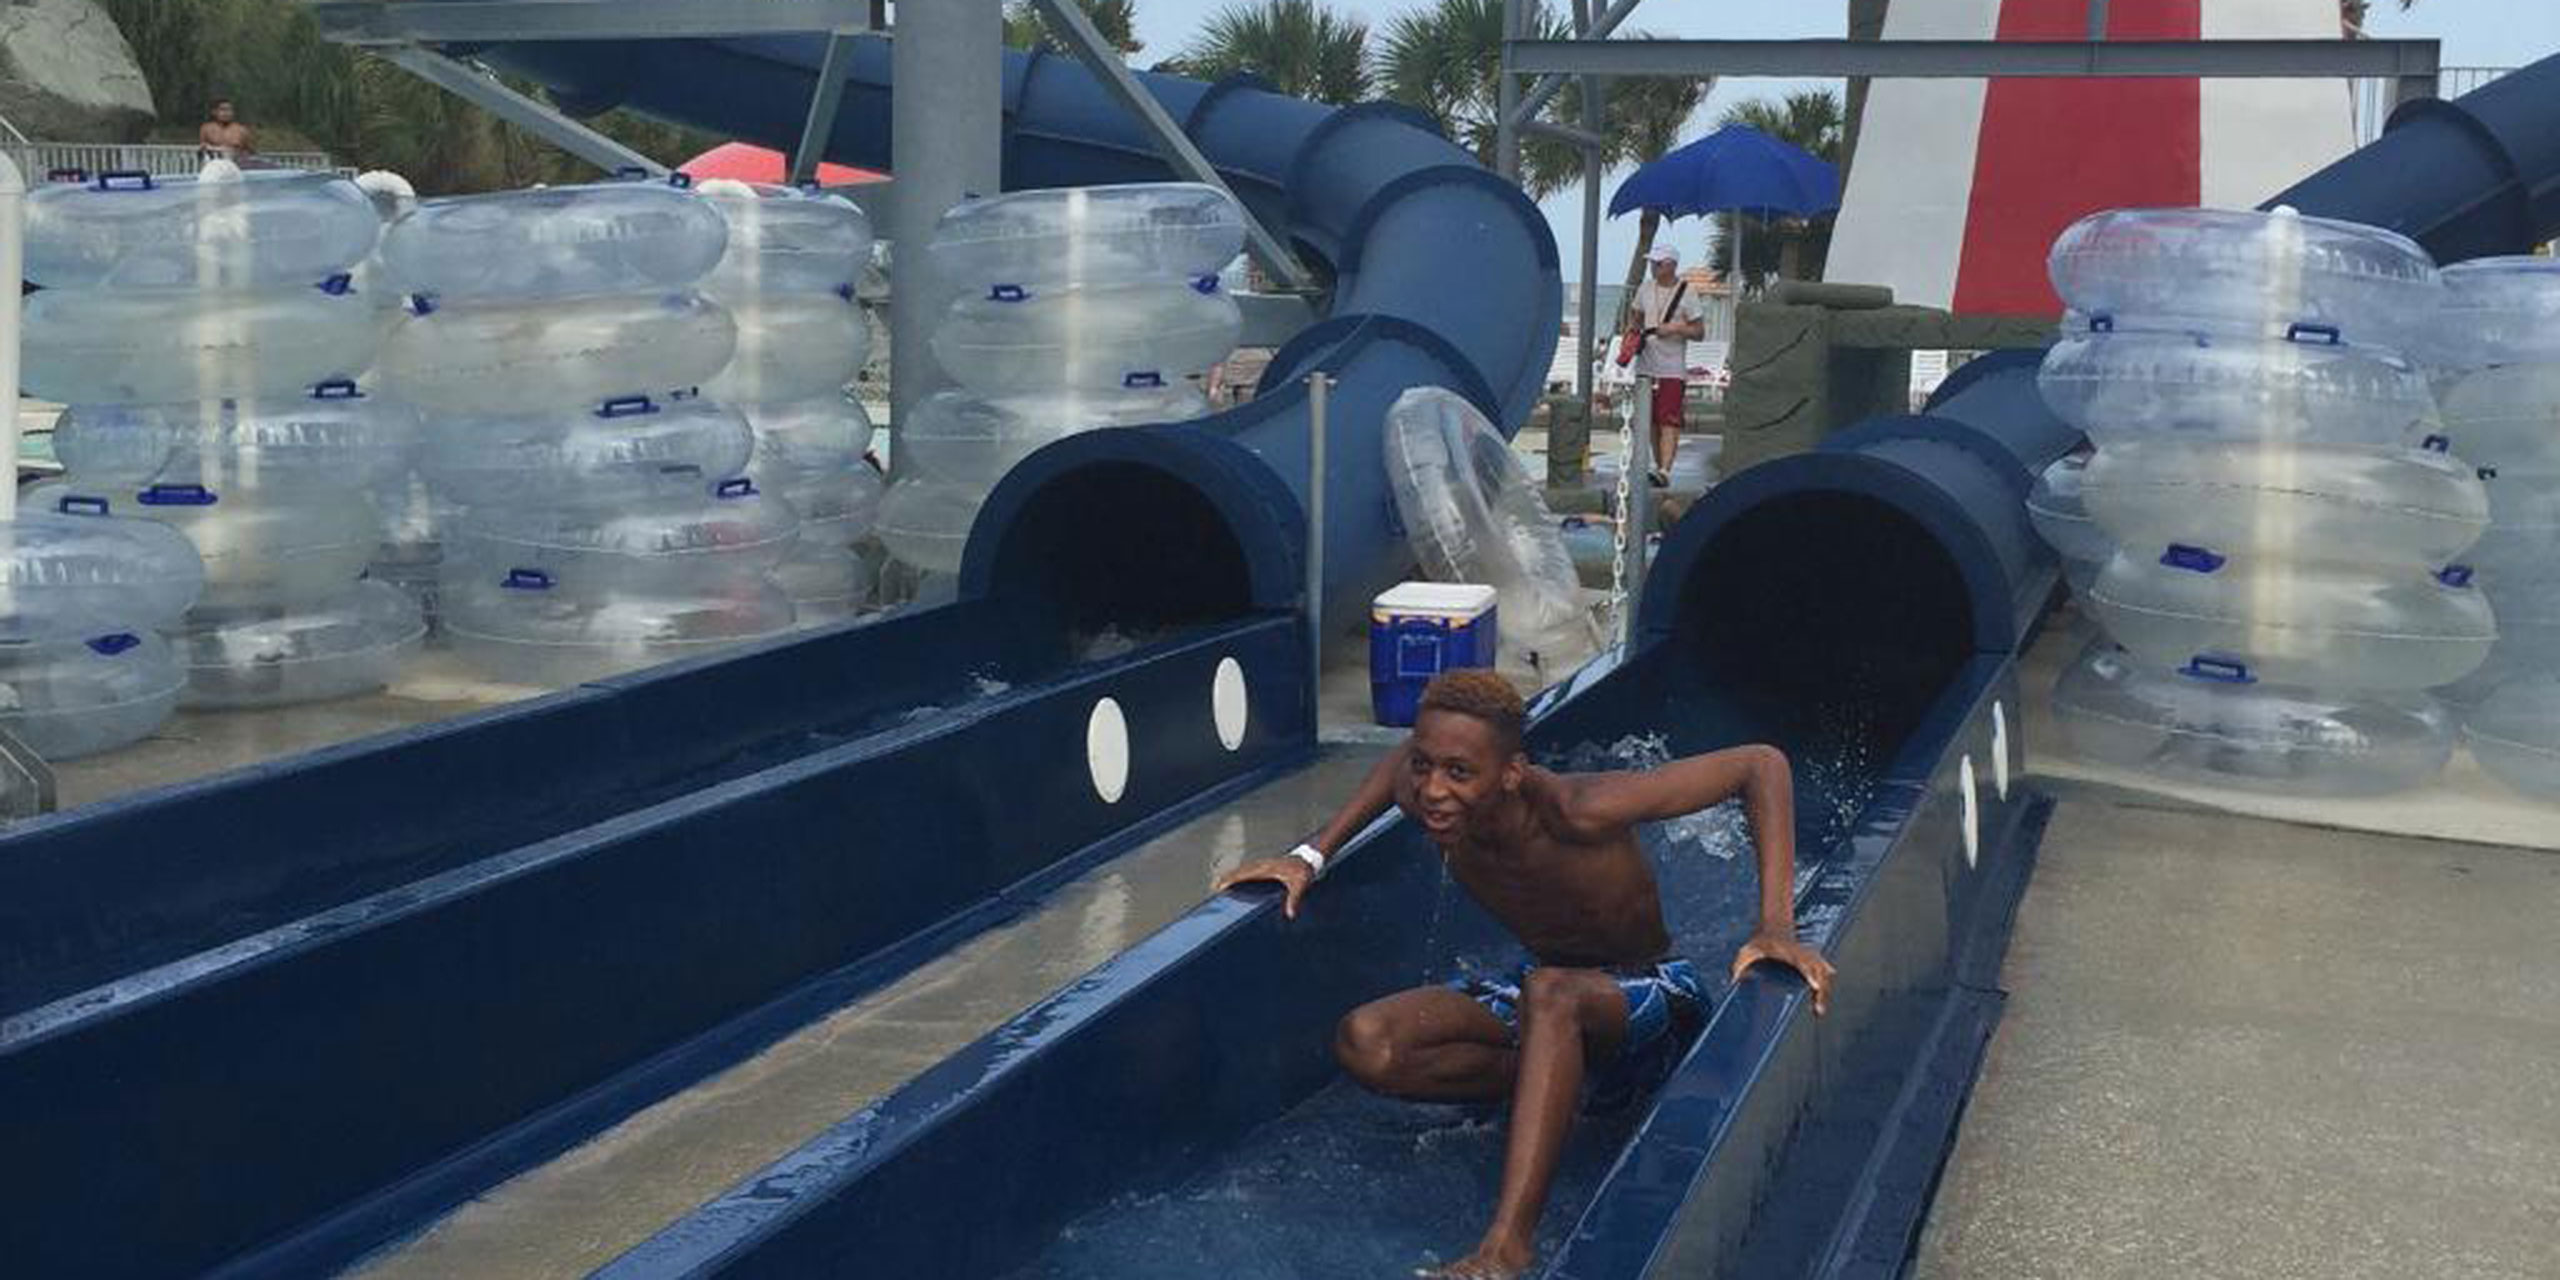 Splashes Oceanfront Water Park (Myrtle Beach, SC) 2023 Review & Ratings